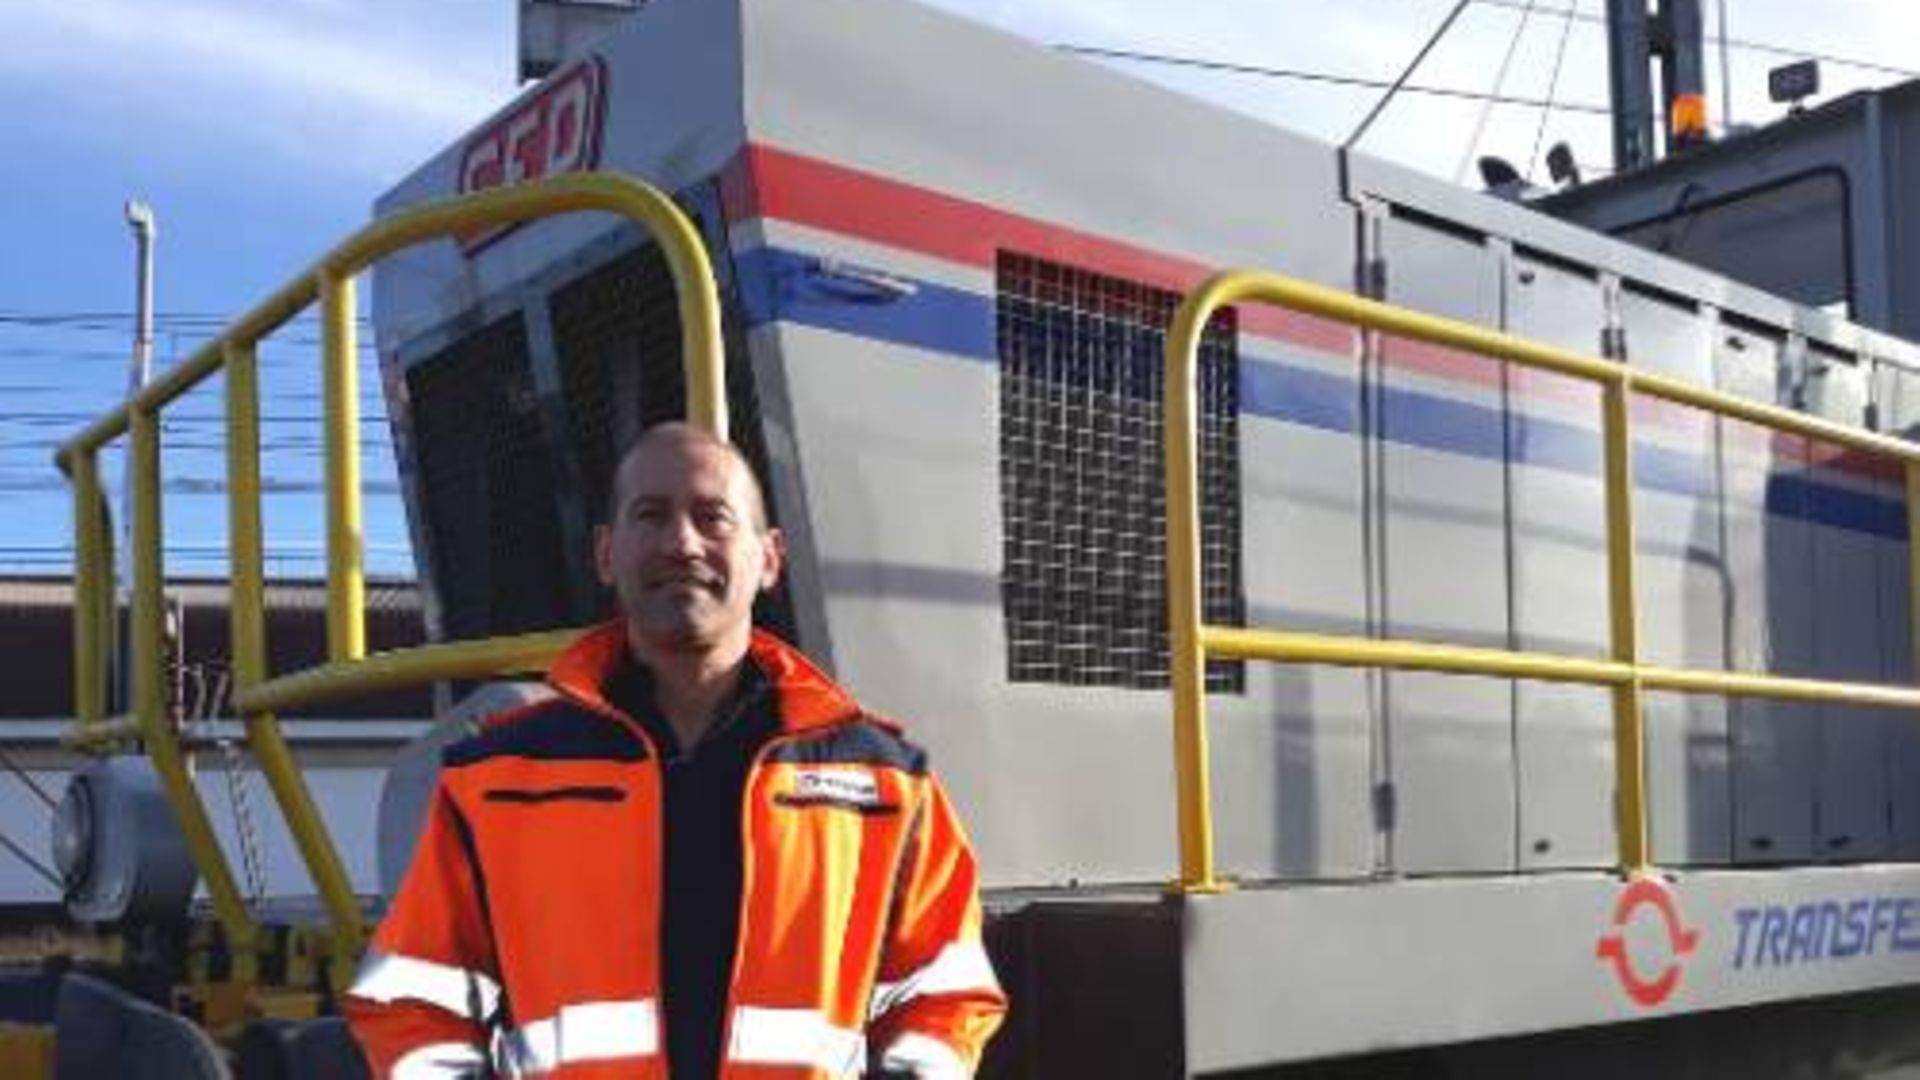 A train driver working for Transfesa Logistics standing in front of a train